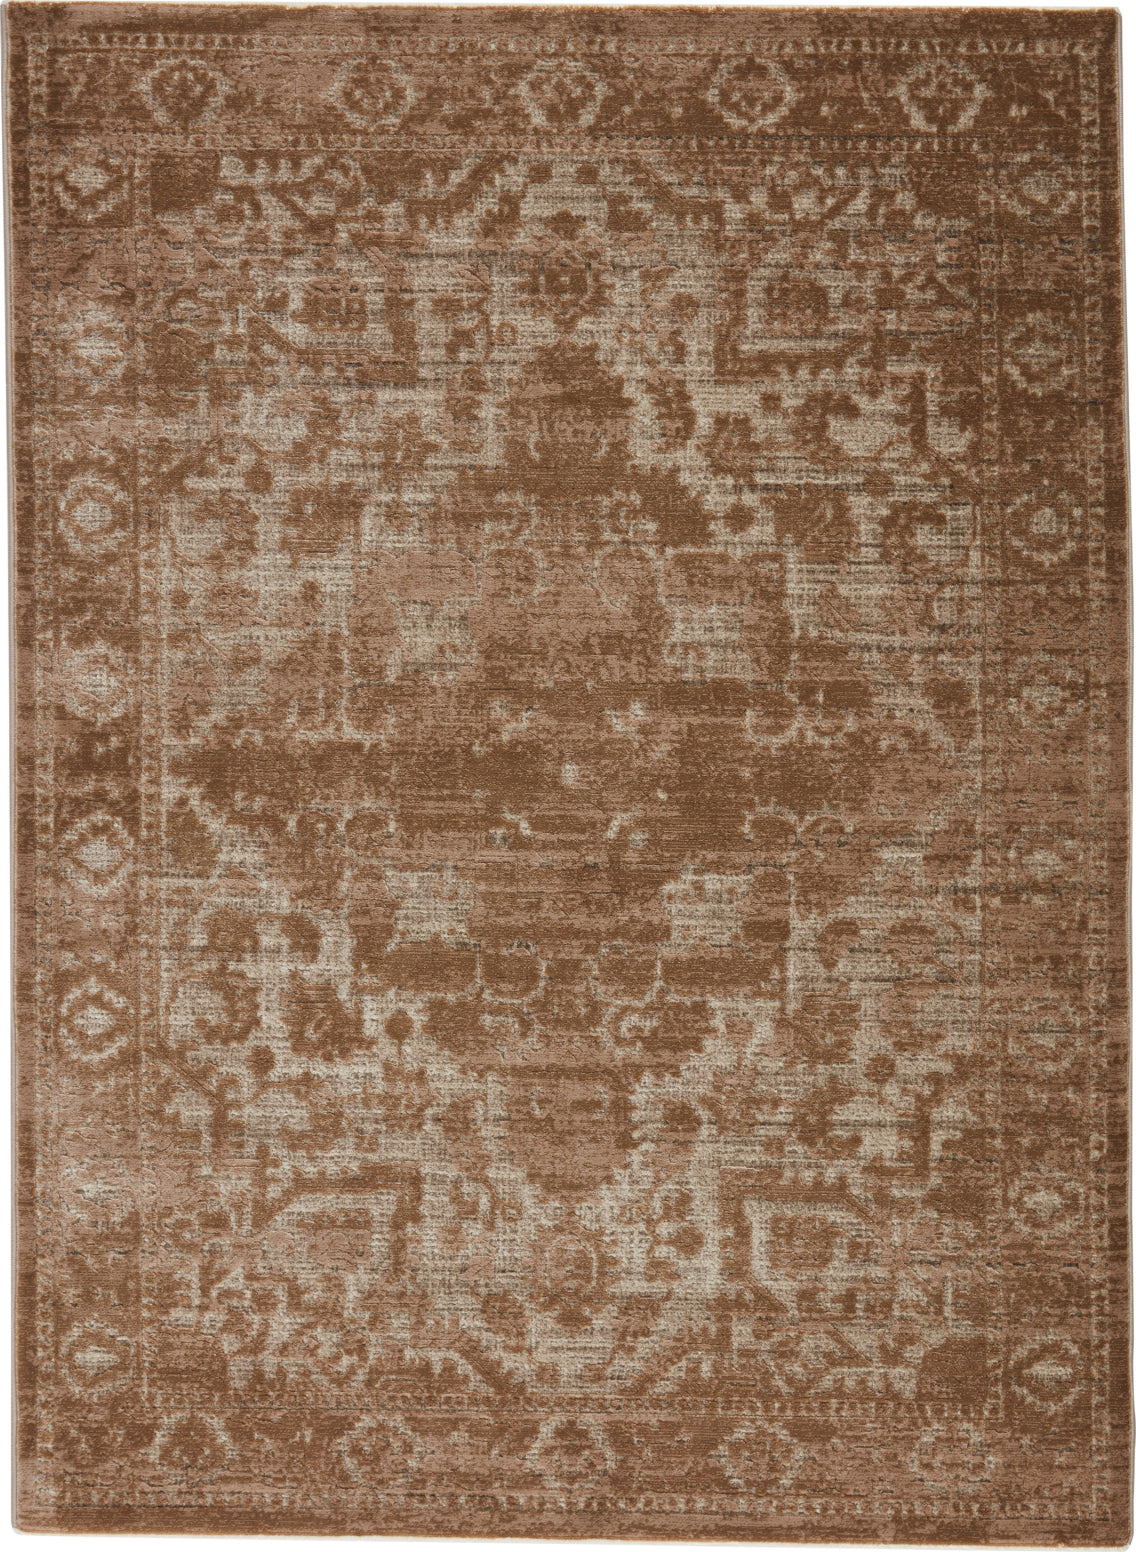 Jaipur Living Brienne Idella BNN07 Gold/Light Taupe Area Rug by Vibe